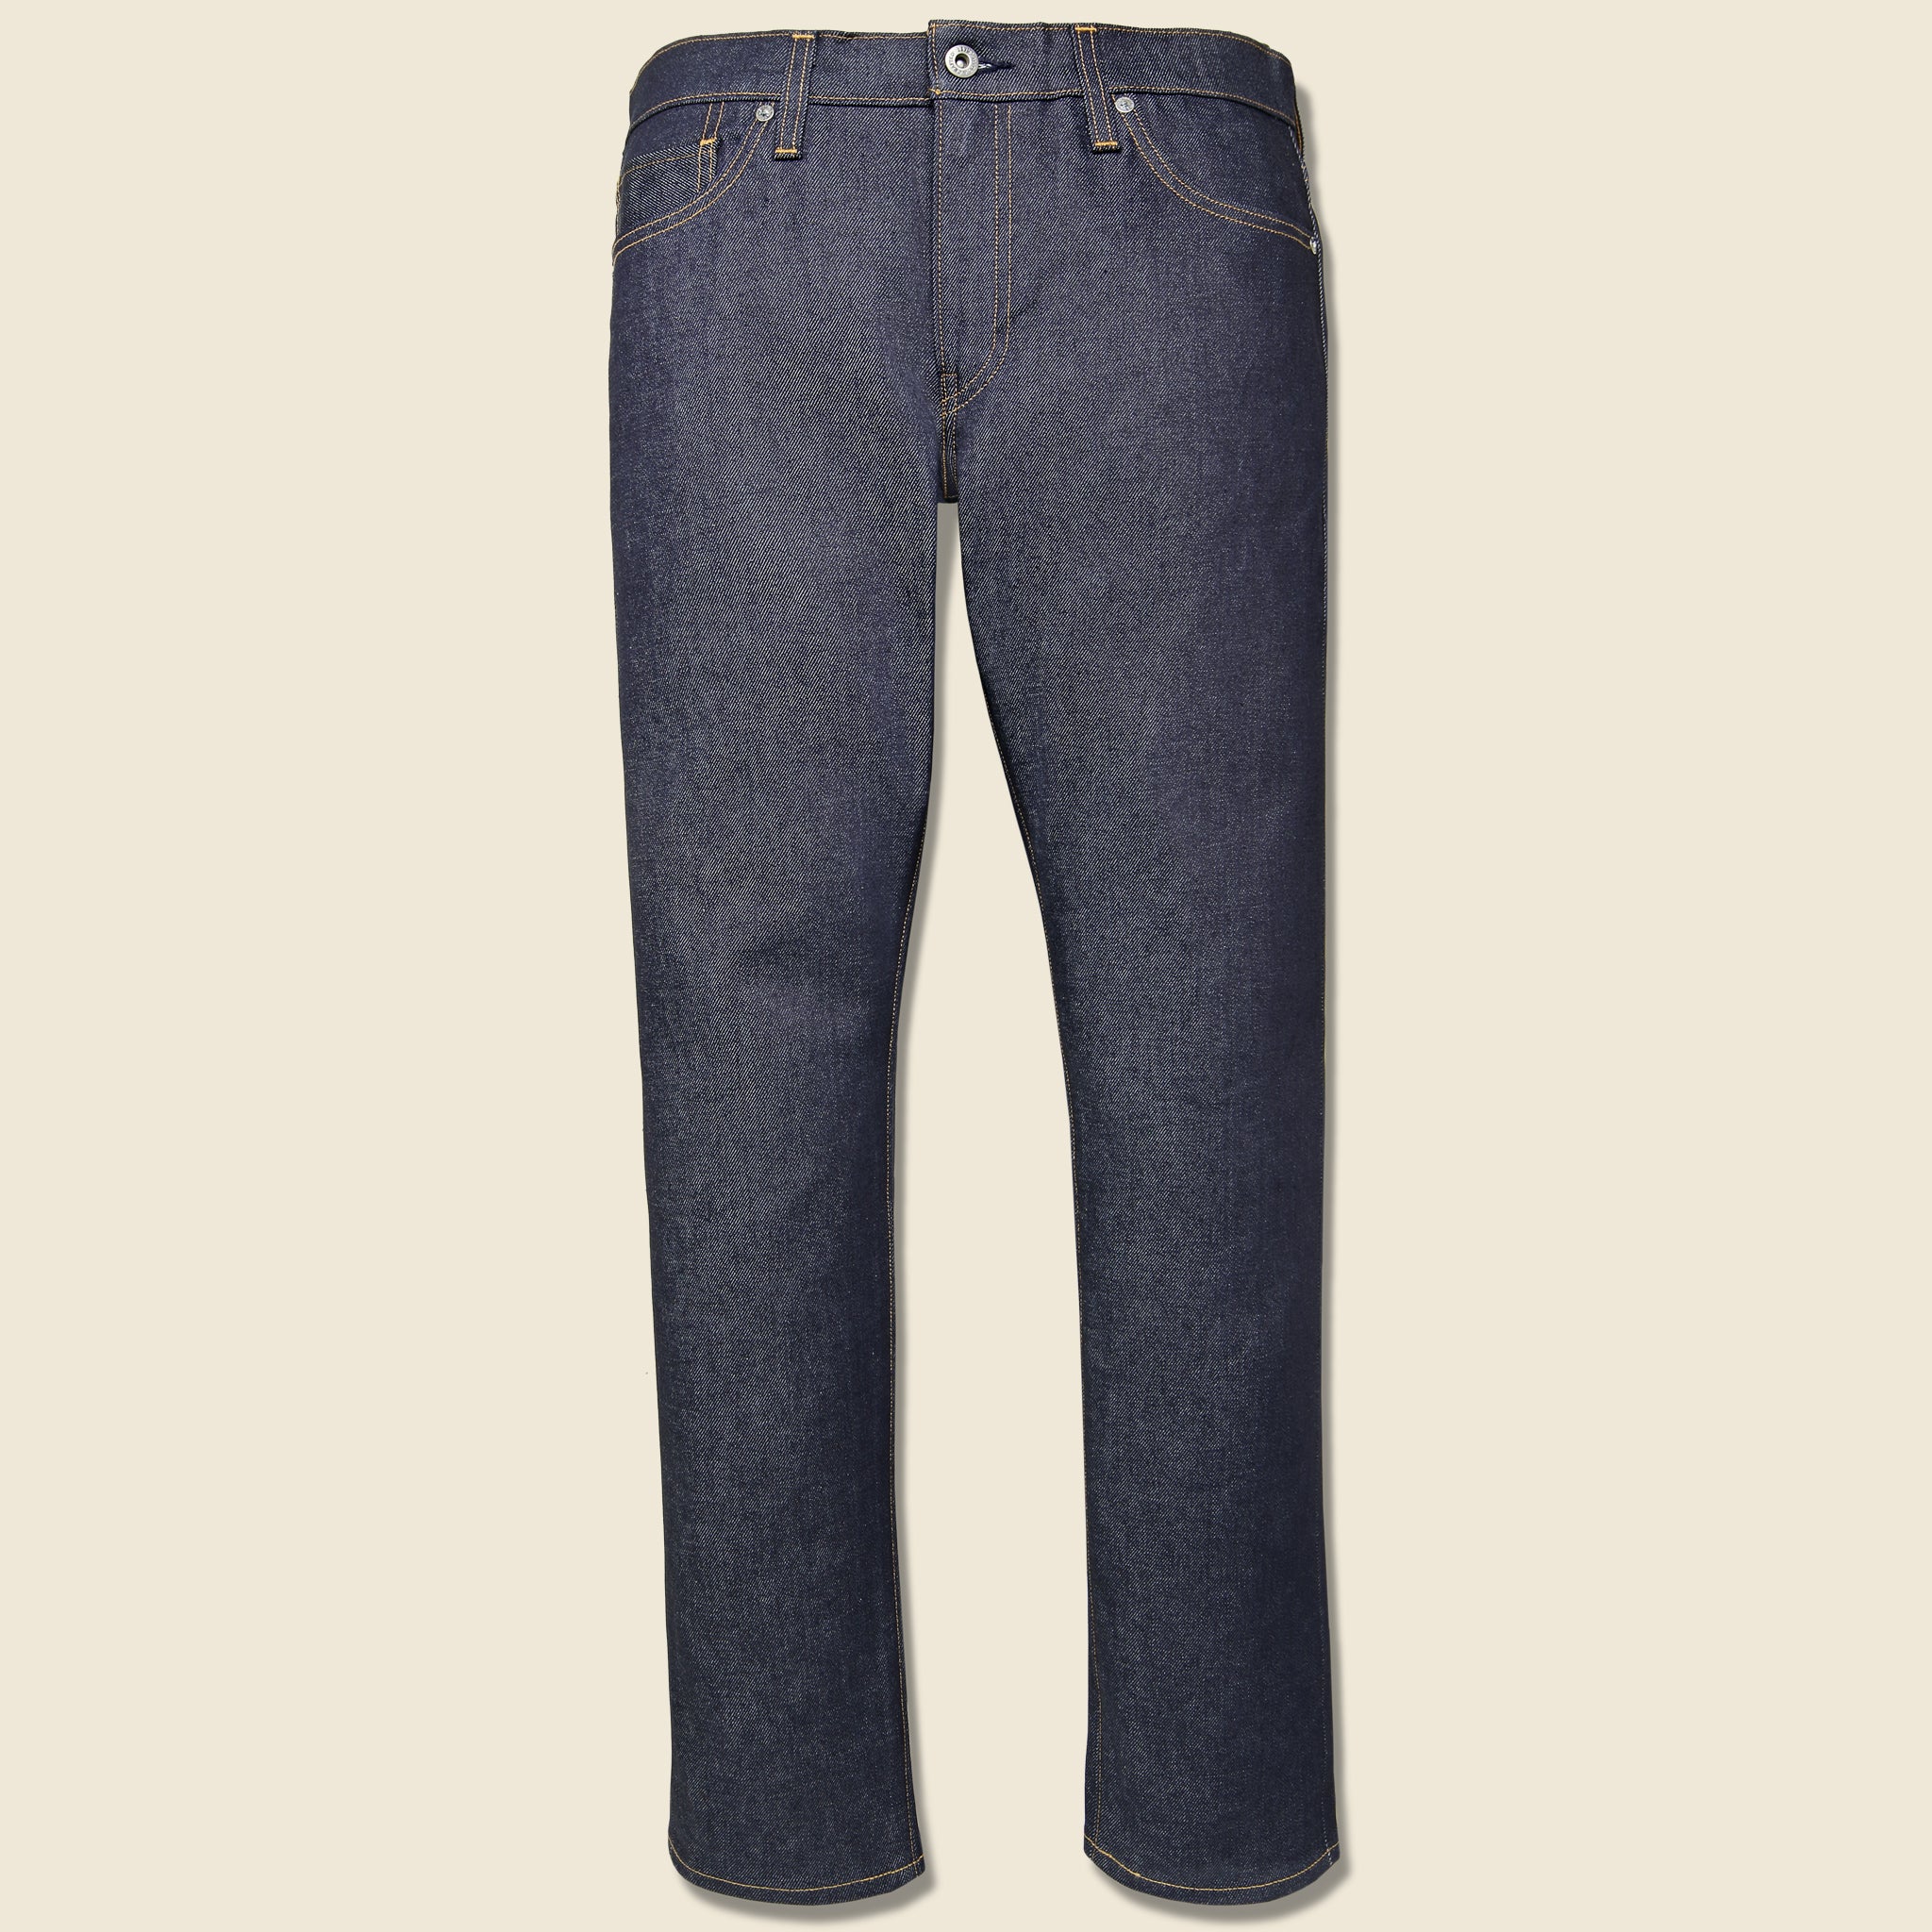 Levis Made \u0026 Crafted 511 Slim Fit Jean 